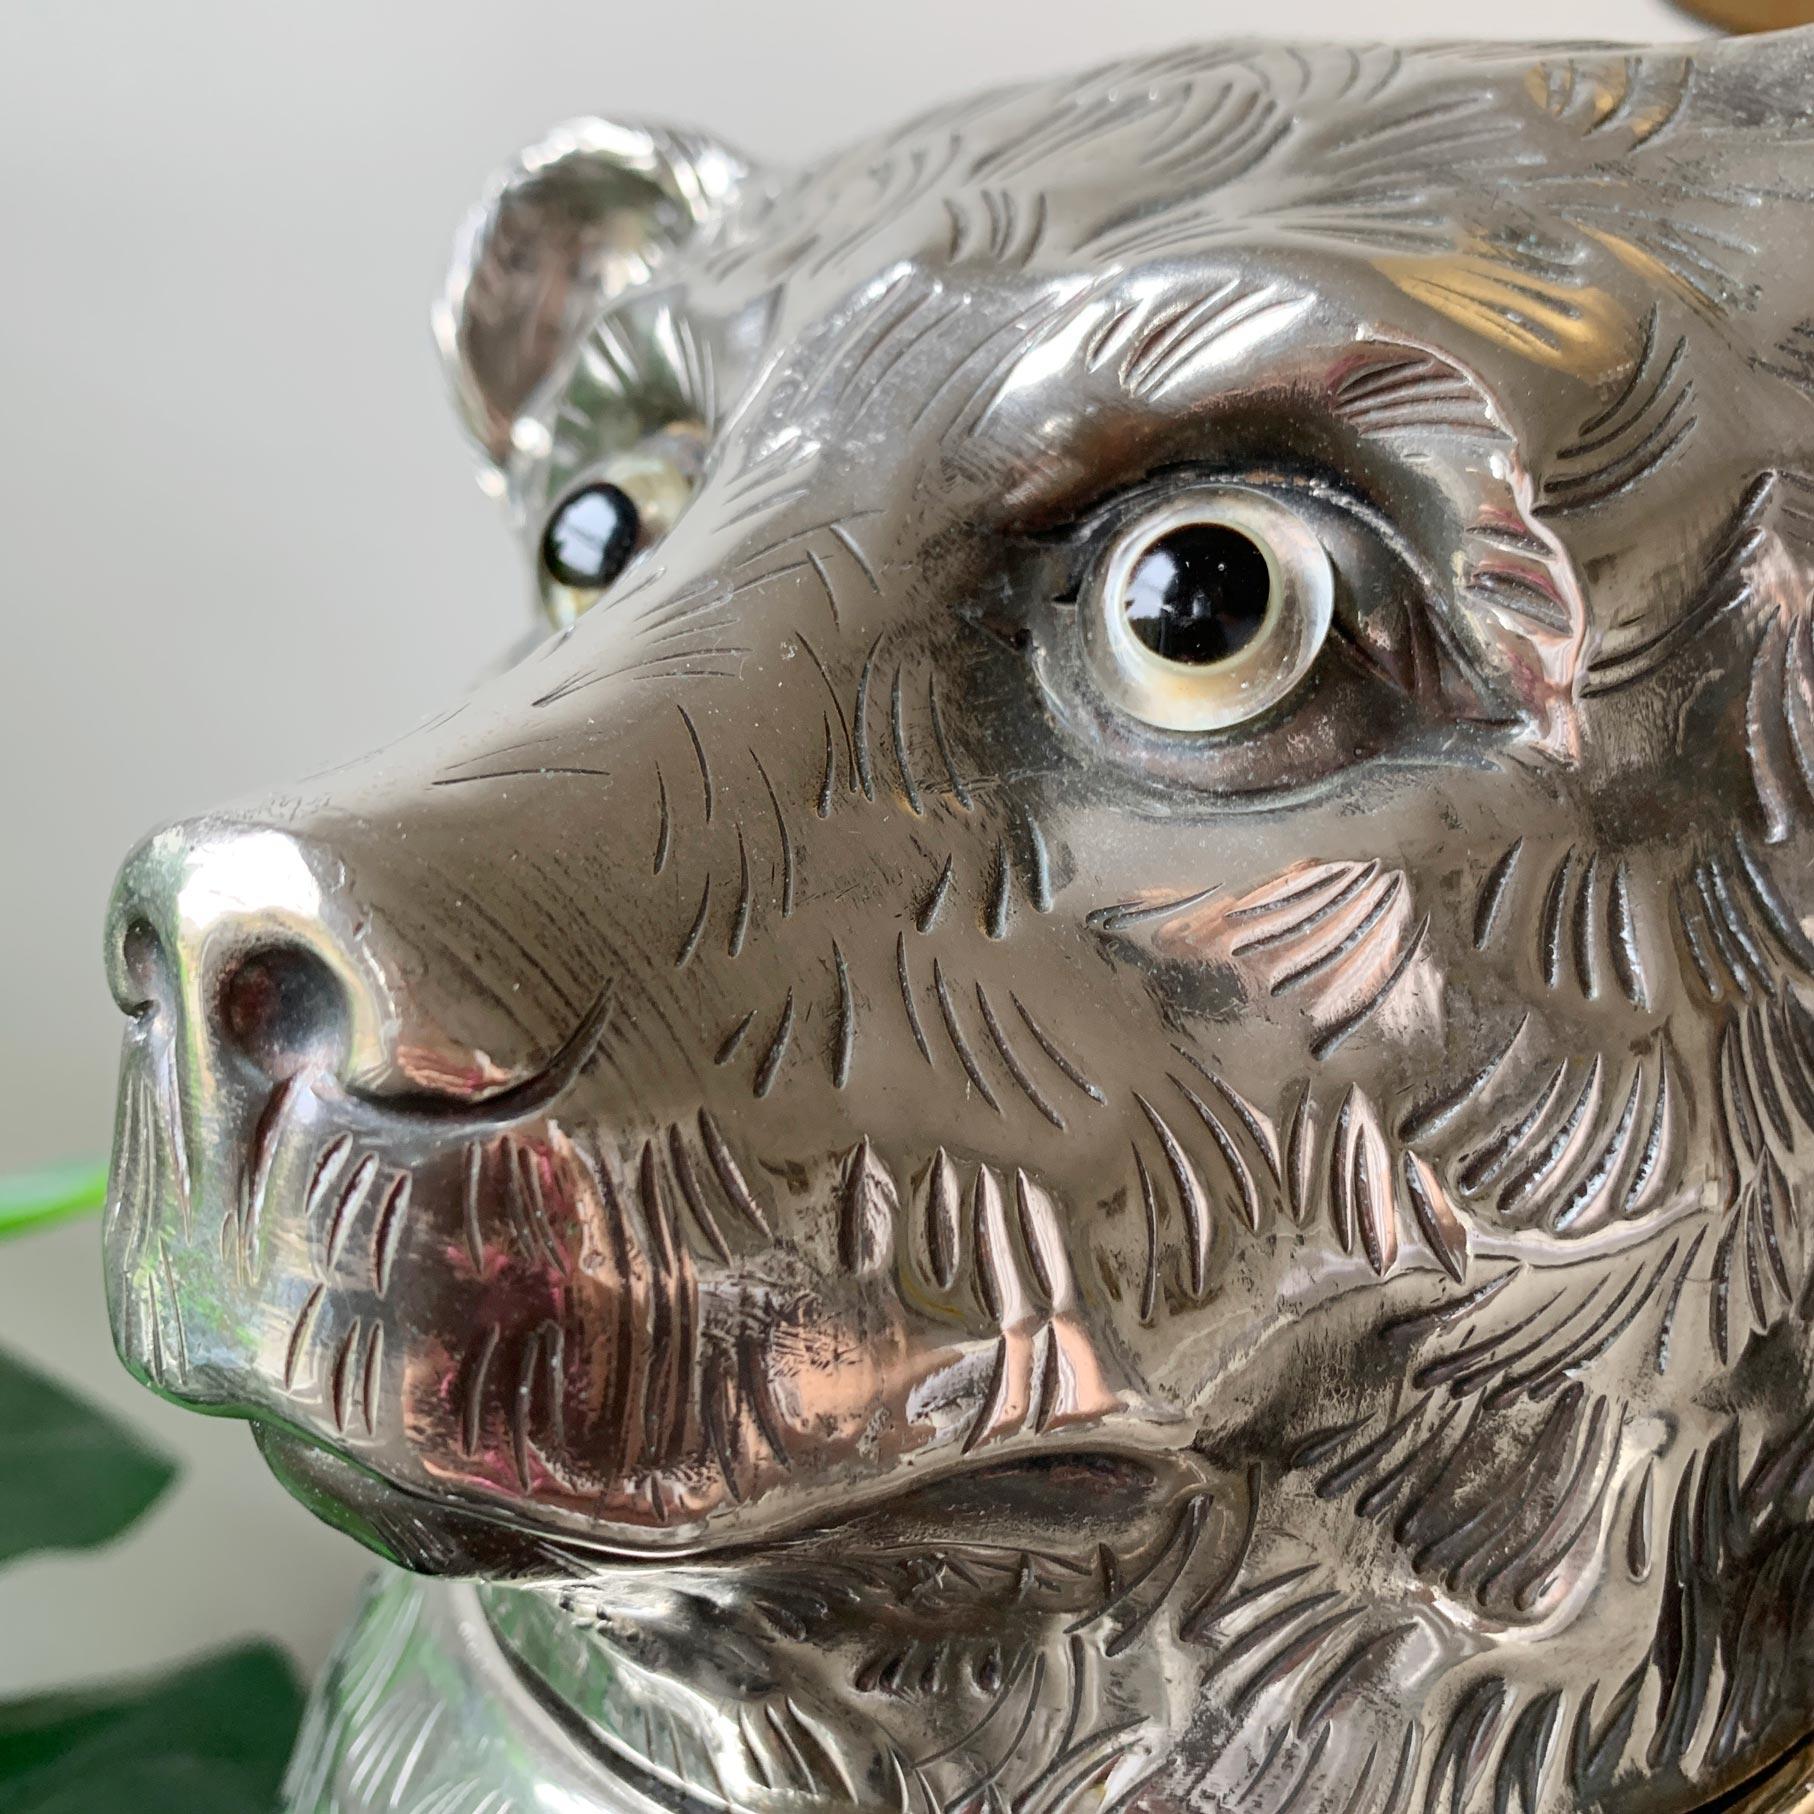 Silver plated bear champagne/wine bottle holder.
1970s Italian 

A fantastic Italian Champagne bottle holder, shaped as a bear with clear glass eyes, the body detailing formed to simulate fur, paws to the side, an absolutely charming piece. 
The